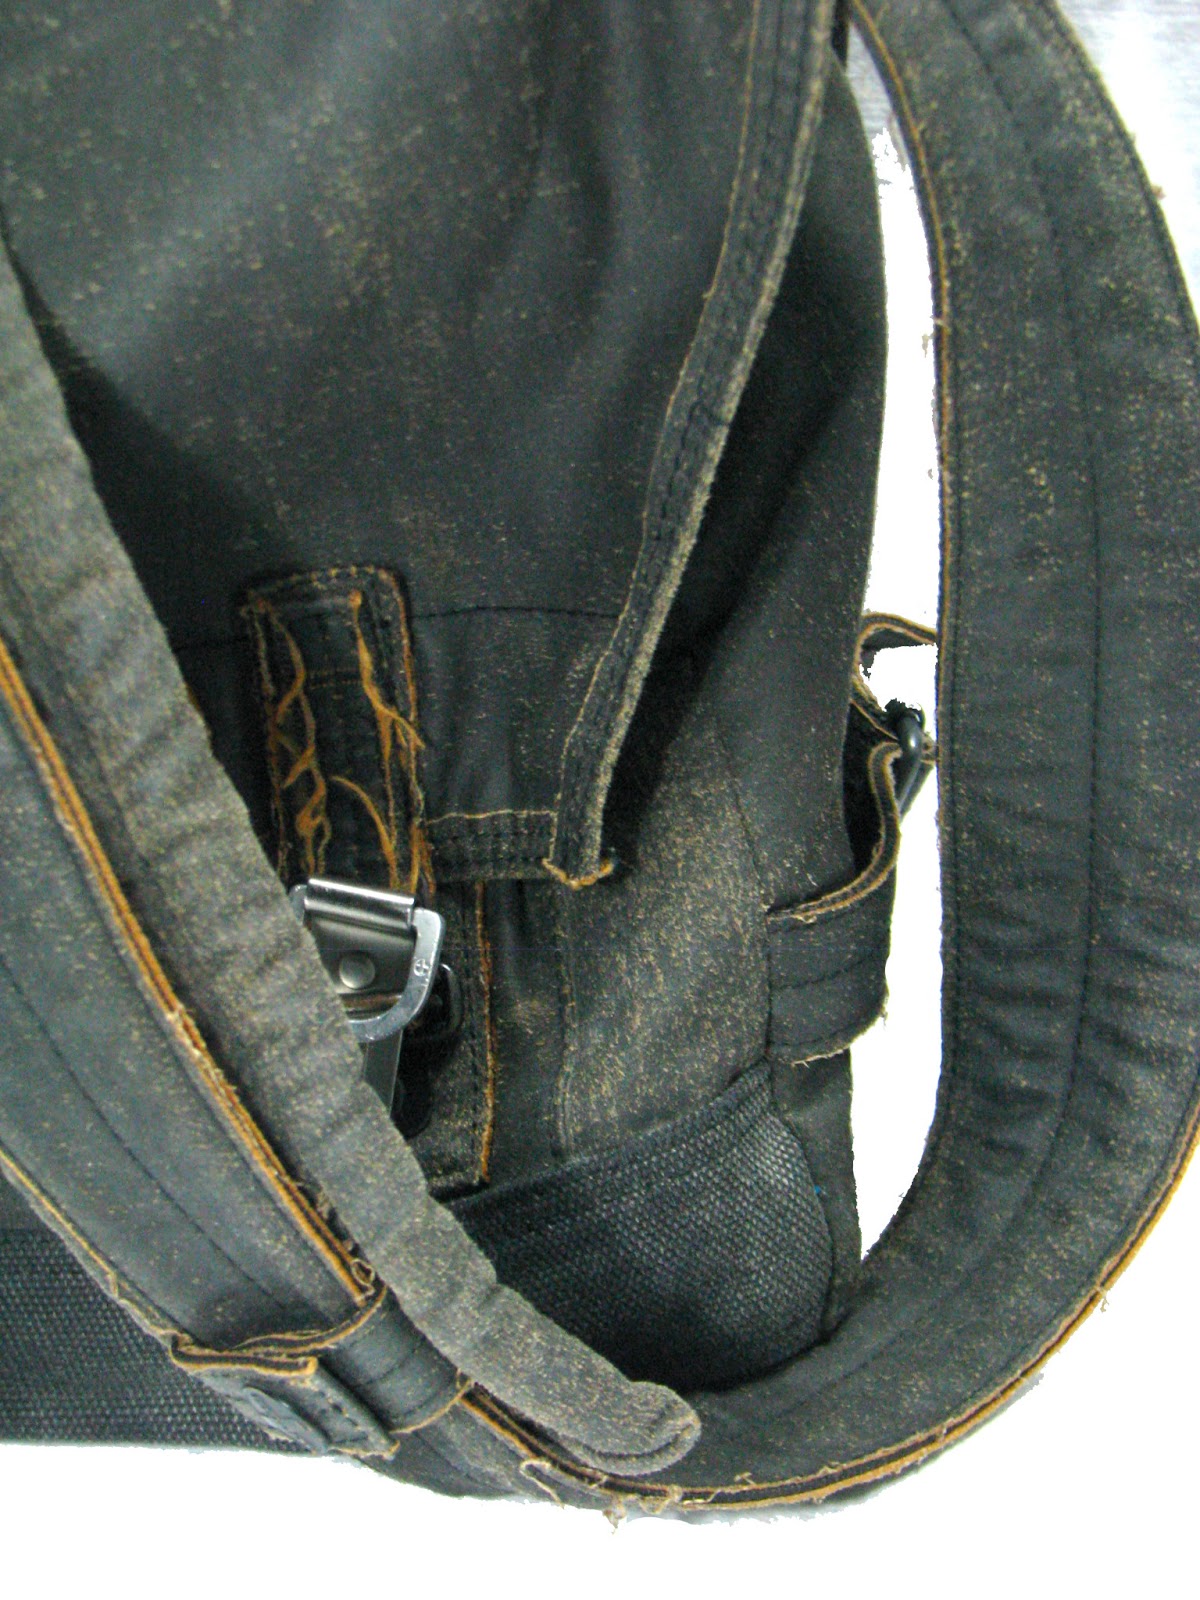 Bag Finds by Jules: When the Tough Gets Tougher! TOUGH JEANSMITH